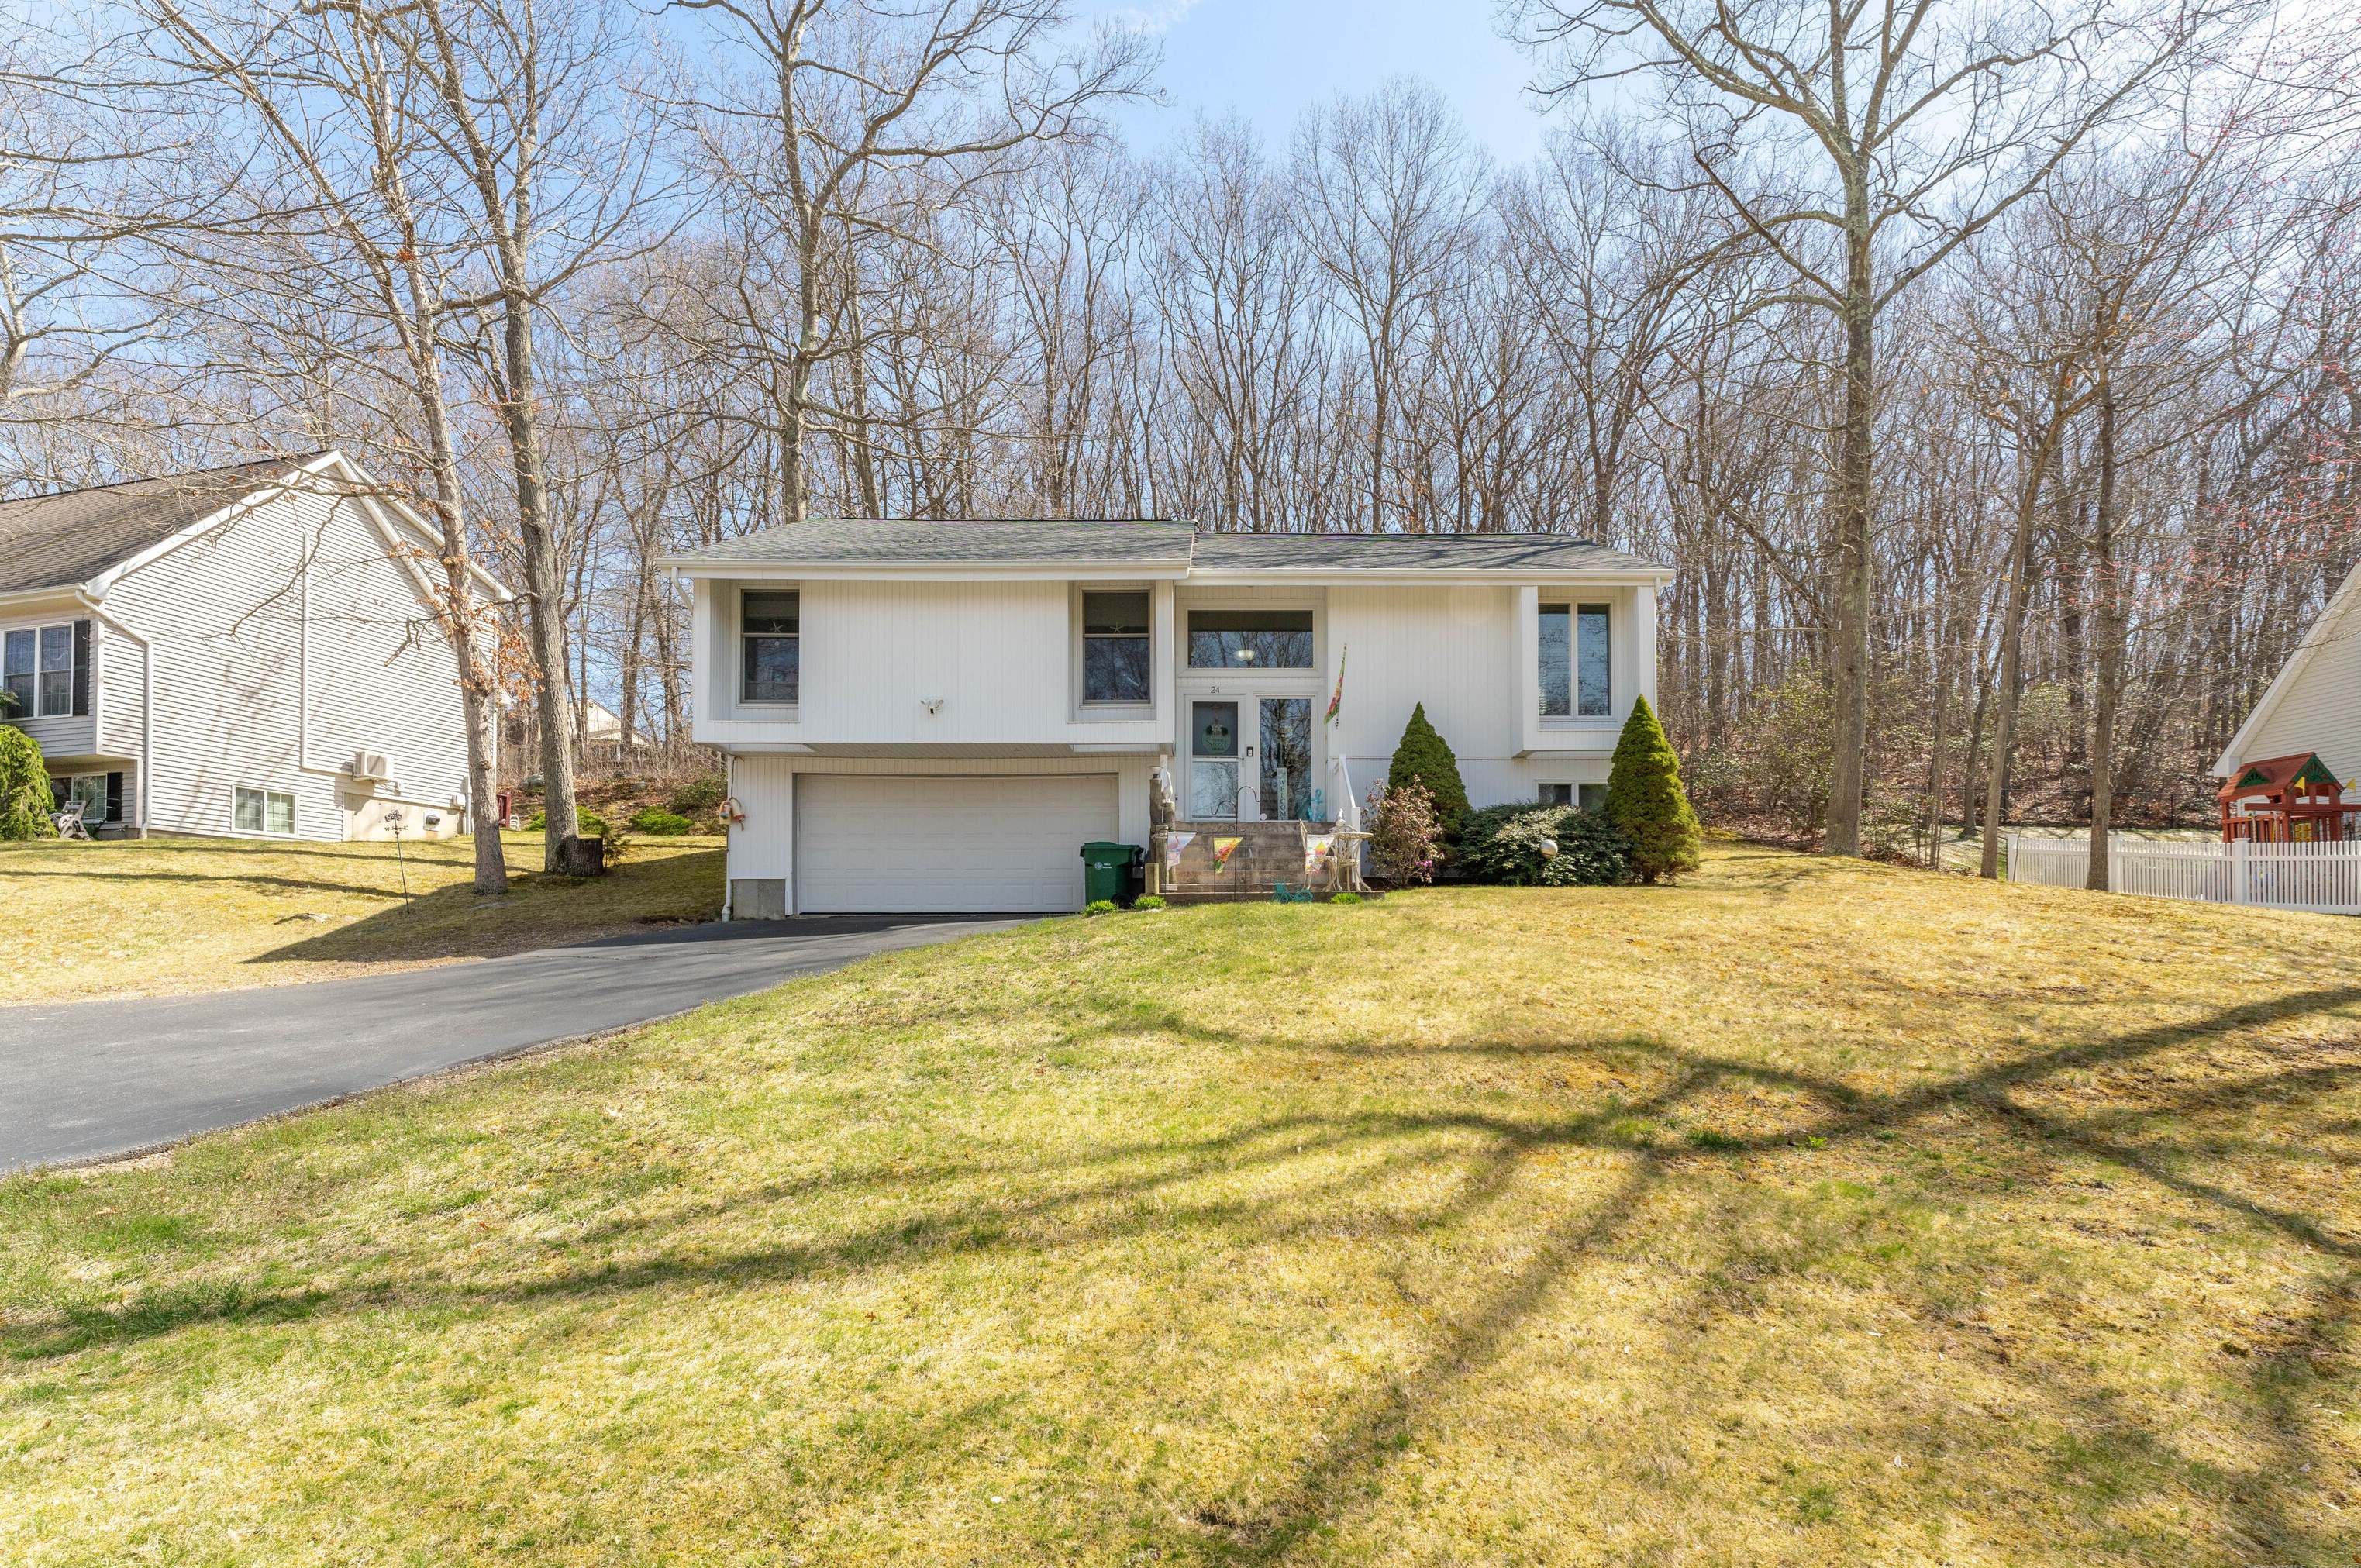 24 Yorkshire Dr, Waterford, CT 06385 exterior